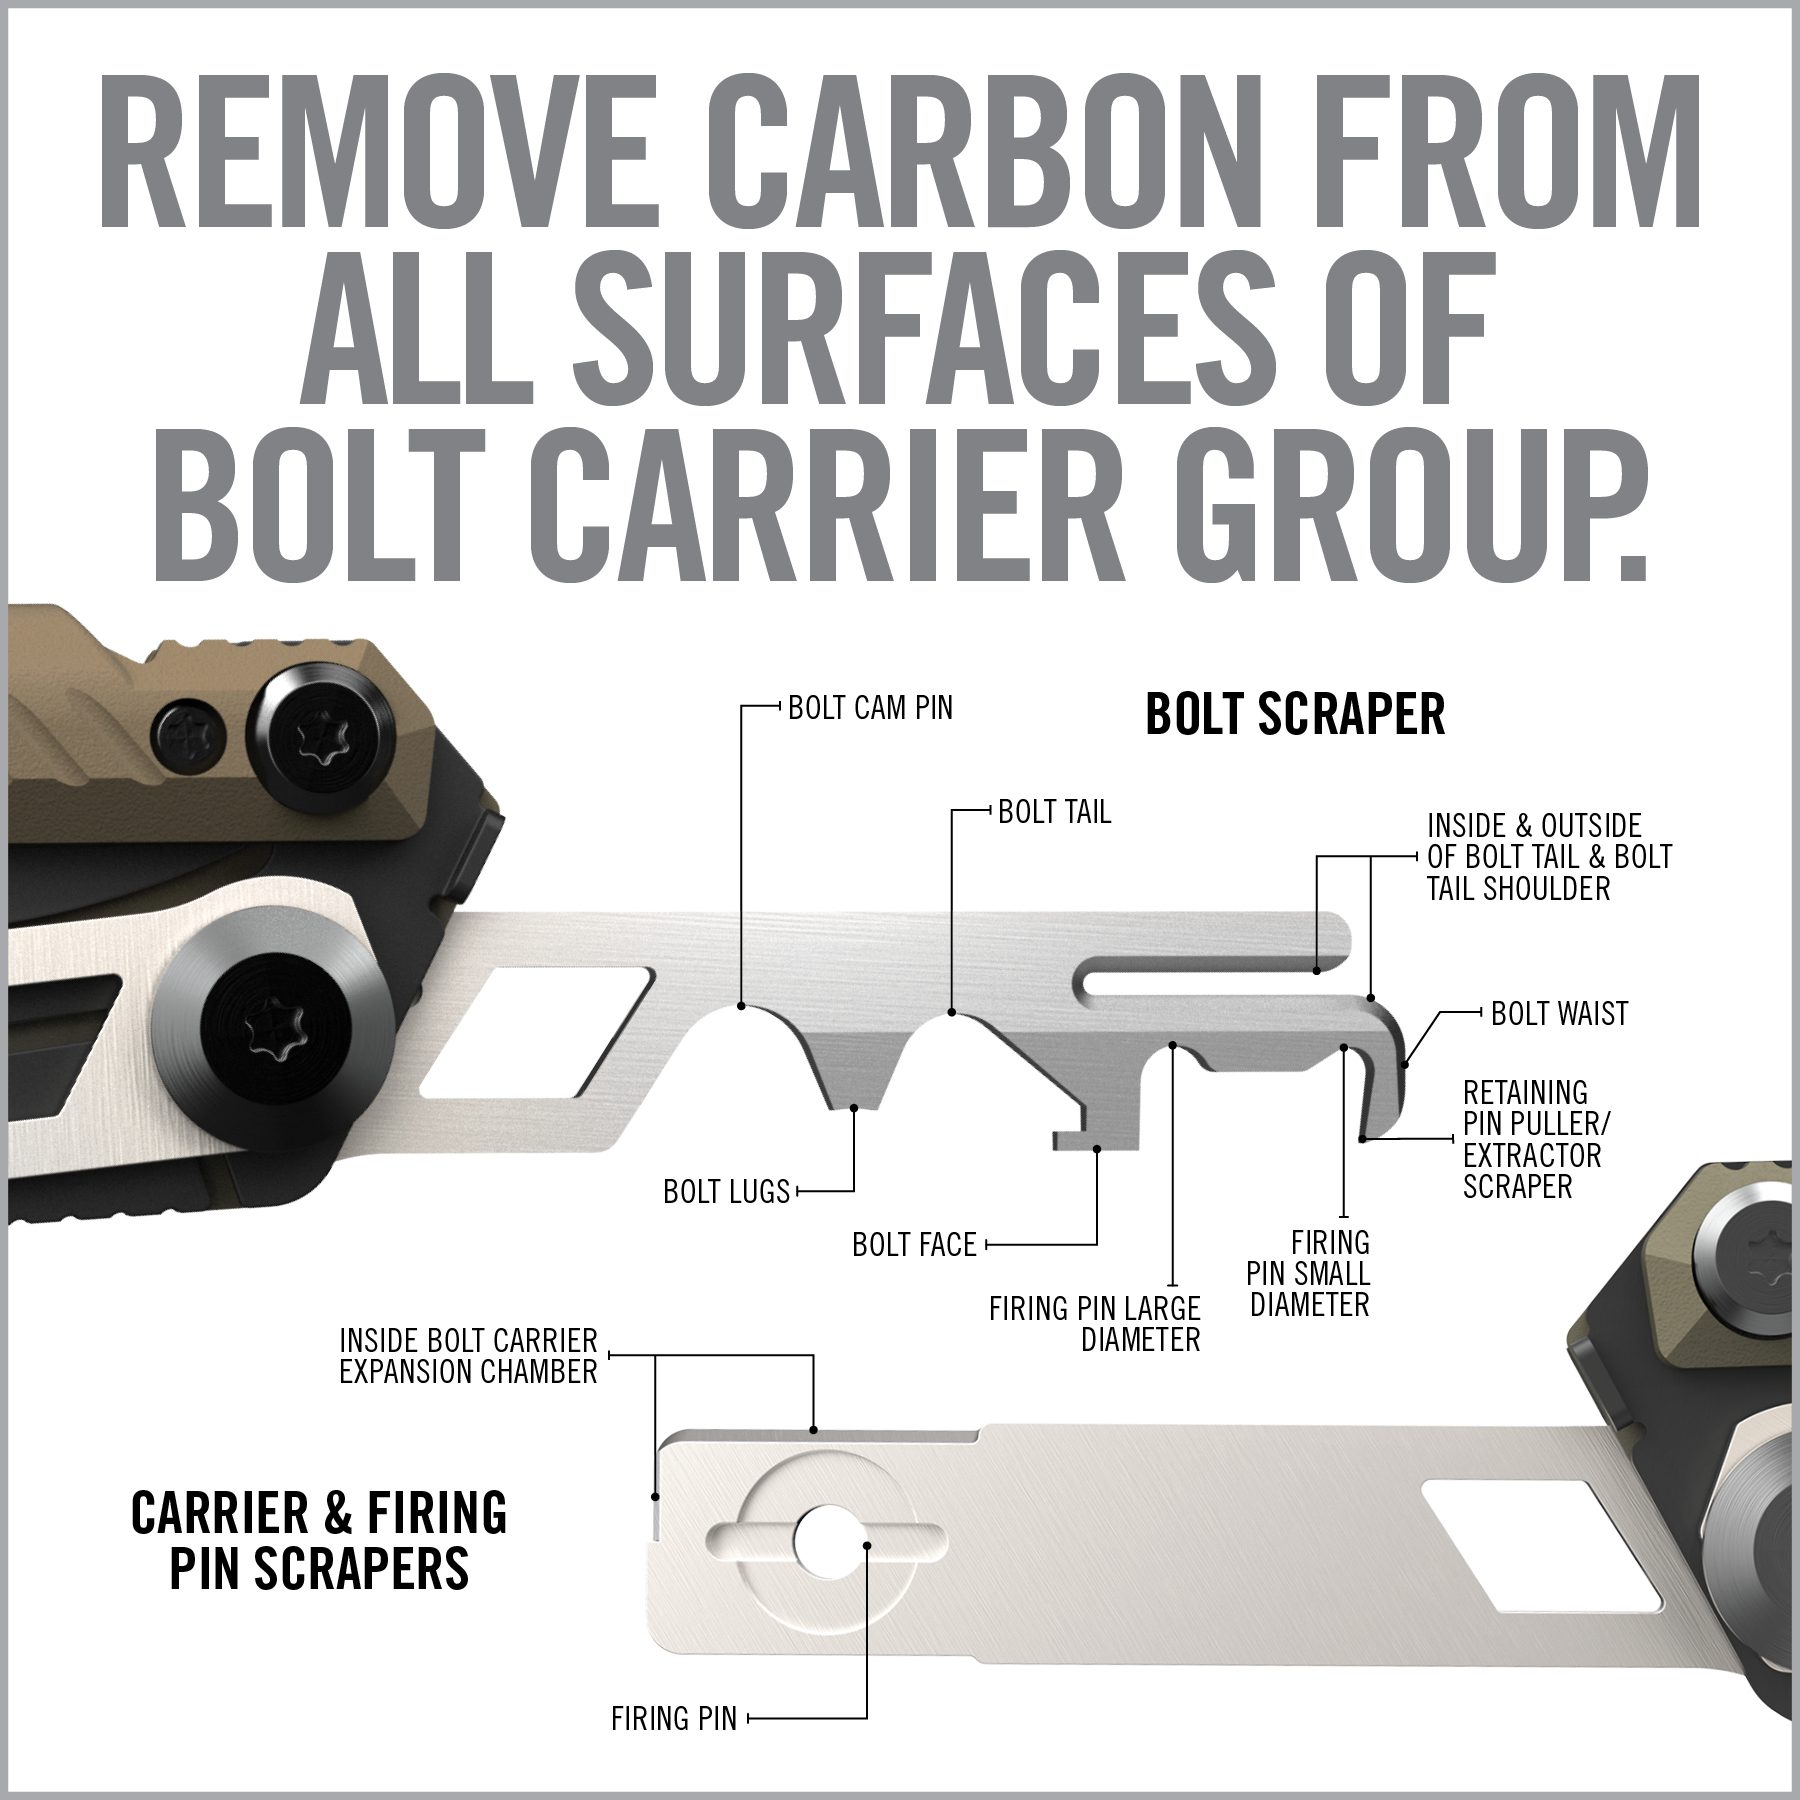 a poster with instructions on how to remove carbon from all surfaces of bolt carrier group